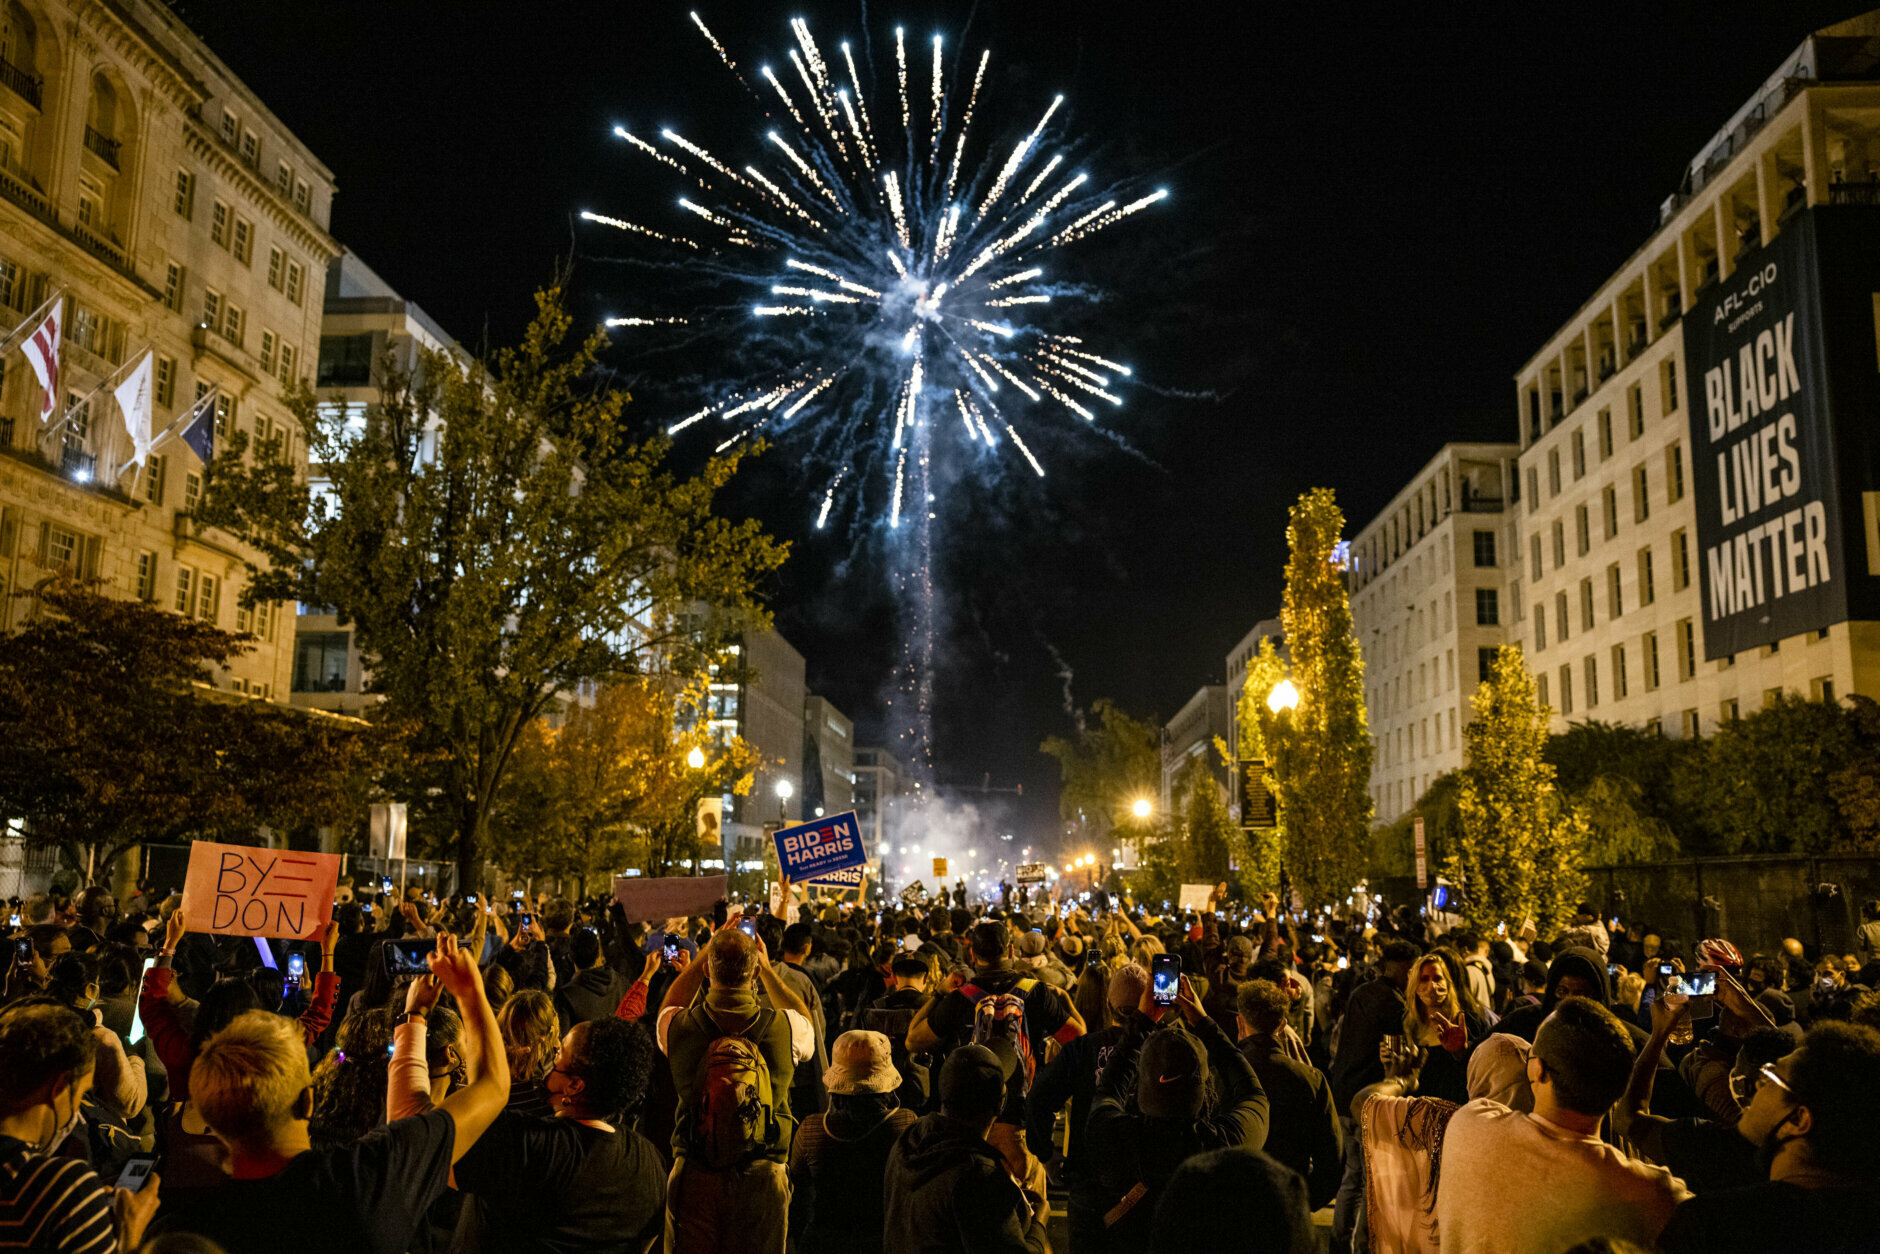 WASHINGTON, DC - NOVEMBER 07: Fireworks explode above Black Lives Matter Plaza near the White House as thousands wait to hear President-elect Joe Biden and Vice President-elect Kamala Harris speak from Delaware on November 7, 2020 in Washington, DC. News outlets announced today that Joe Biden had reached the number of electoral votes needed to win the election and become the 46th president of the United States. (Photo by Samuel Corum/Getty Images)